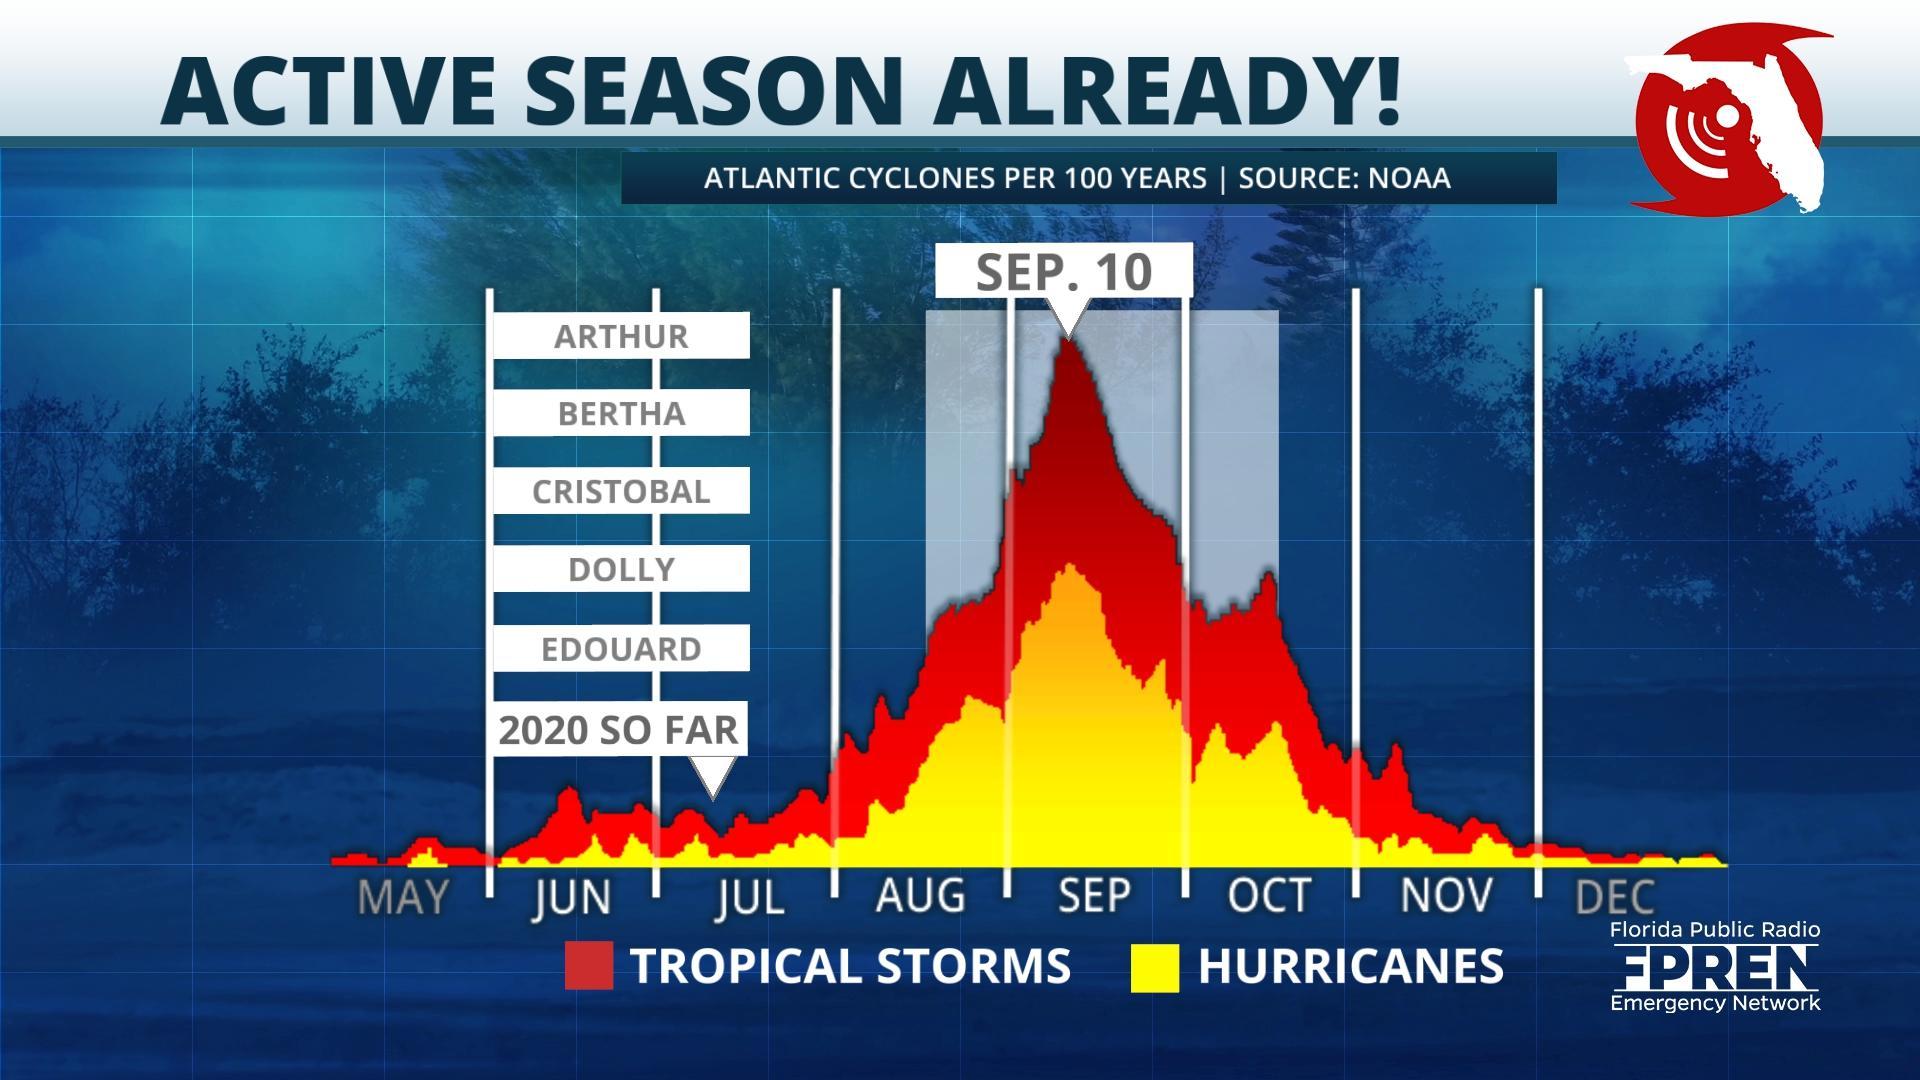 Data Continues to Suggest This Will be An Active Hurricane Season WUWF